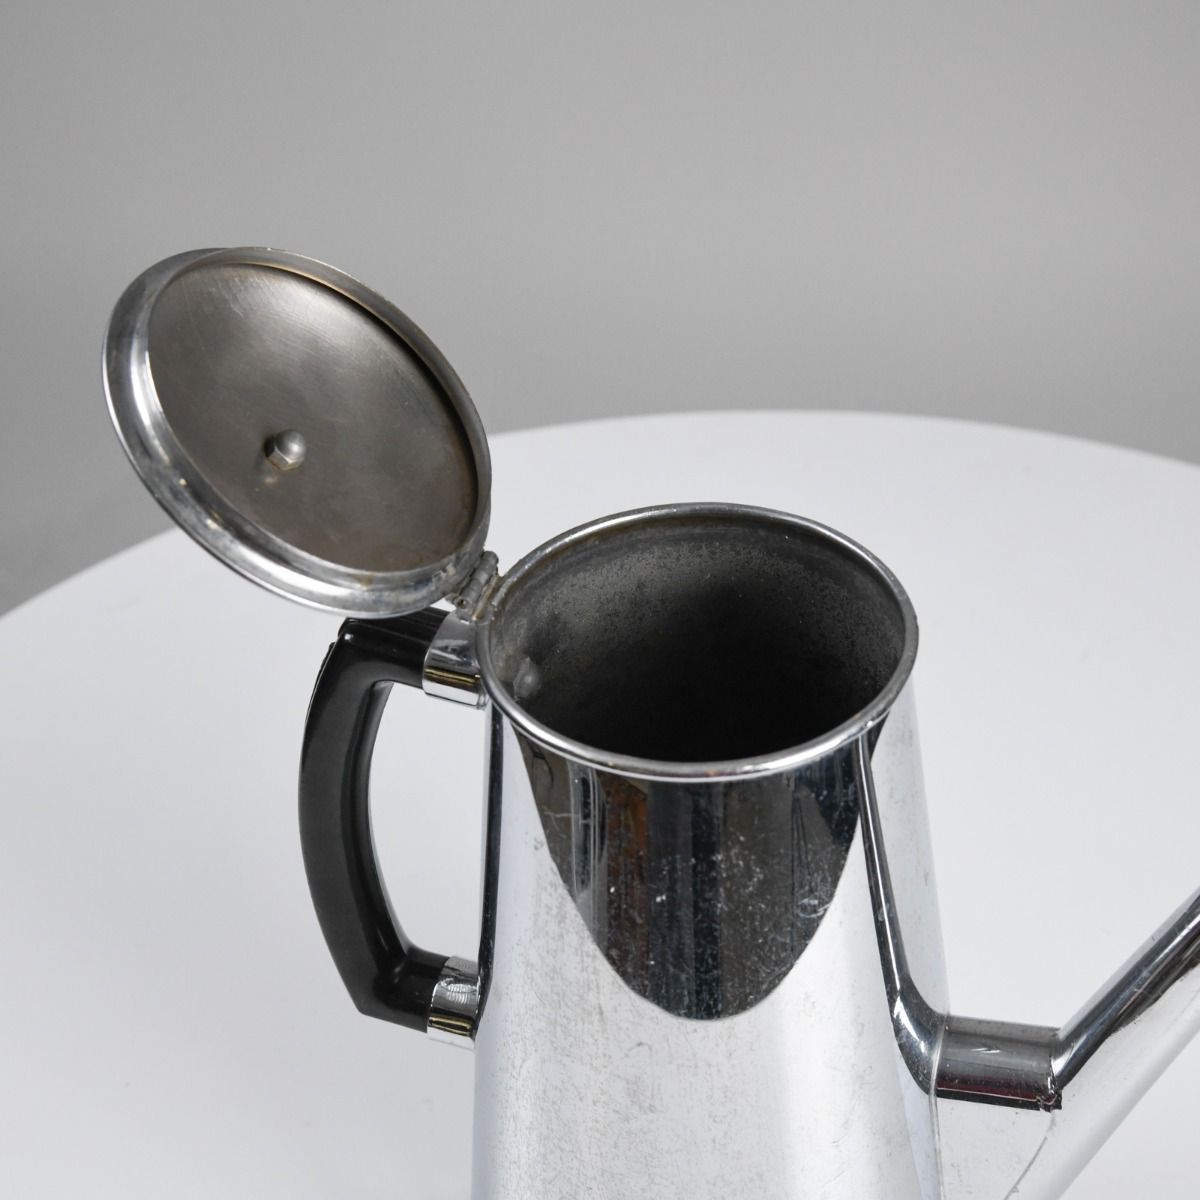 Vintage 1960s Stainless Steel Coffee Pot